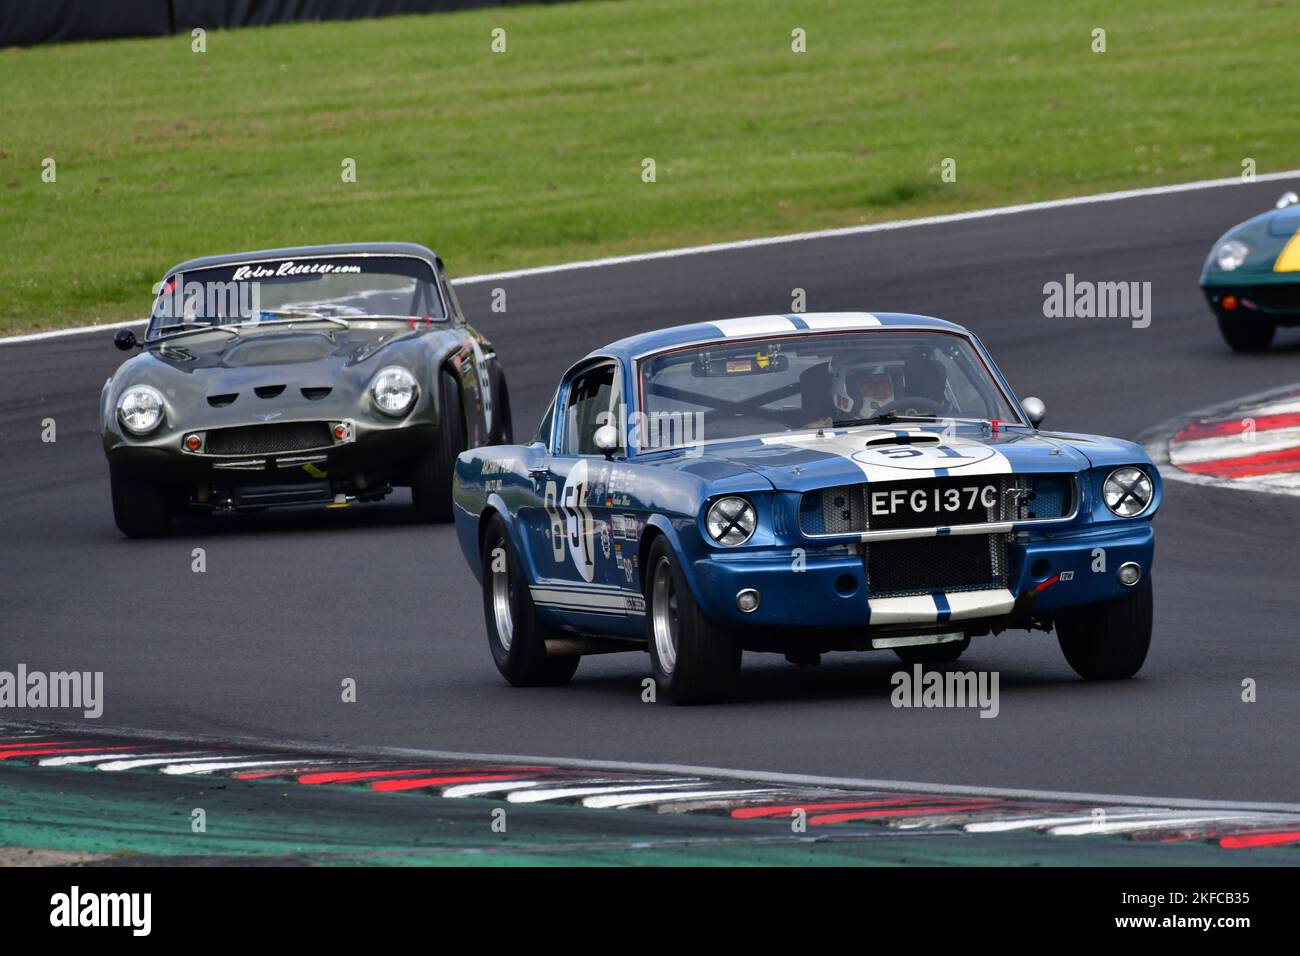 Larry Tucker Ford Shelby Mustang Gt350r Matt Holben Tvr Griffith Equipe Libre Equipe Gts A